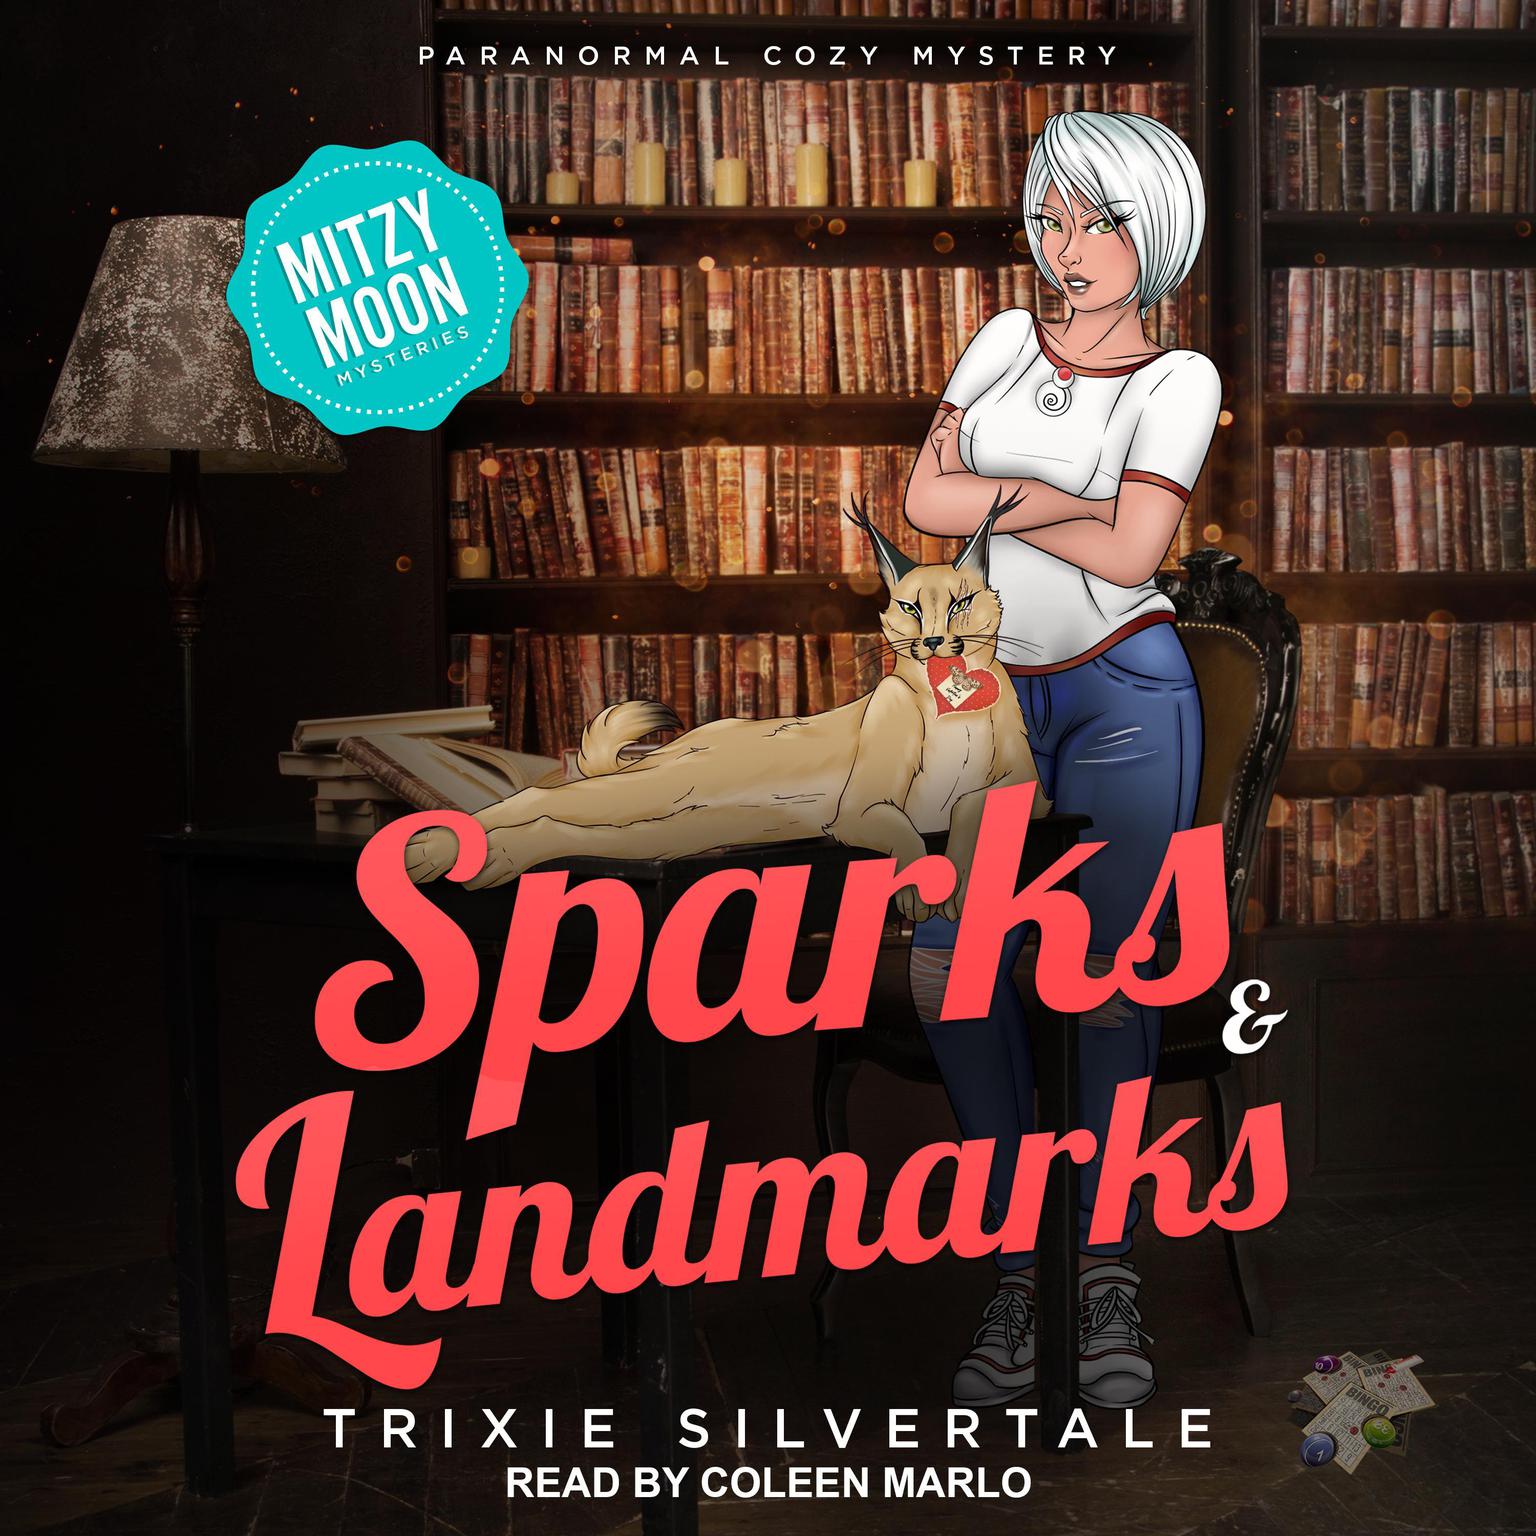 Sparks & Landmarks: Paranormal Cozy Mystery Audiobook, by Trixie Silvertale